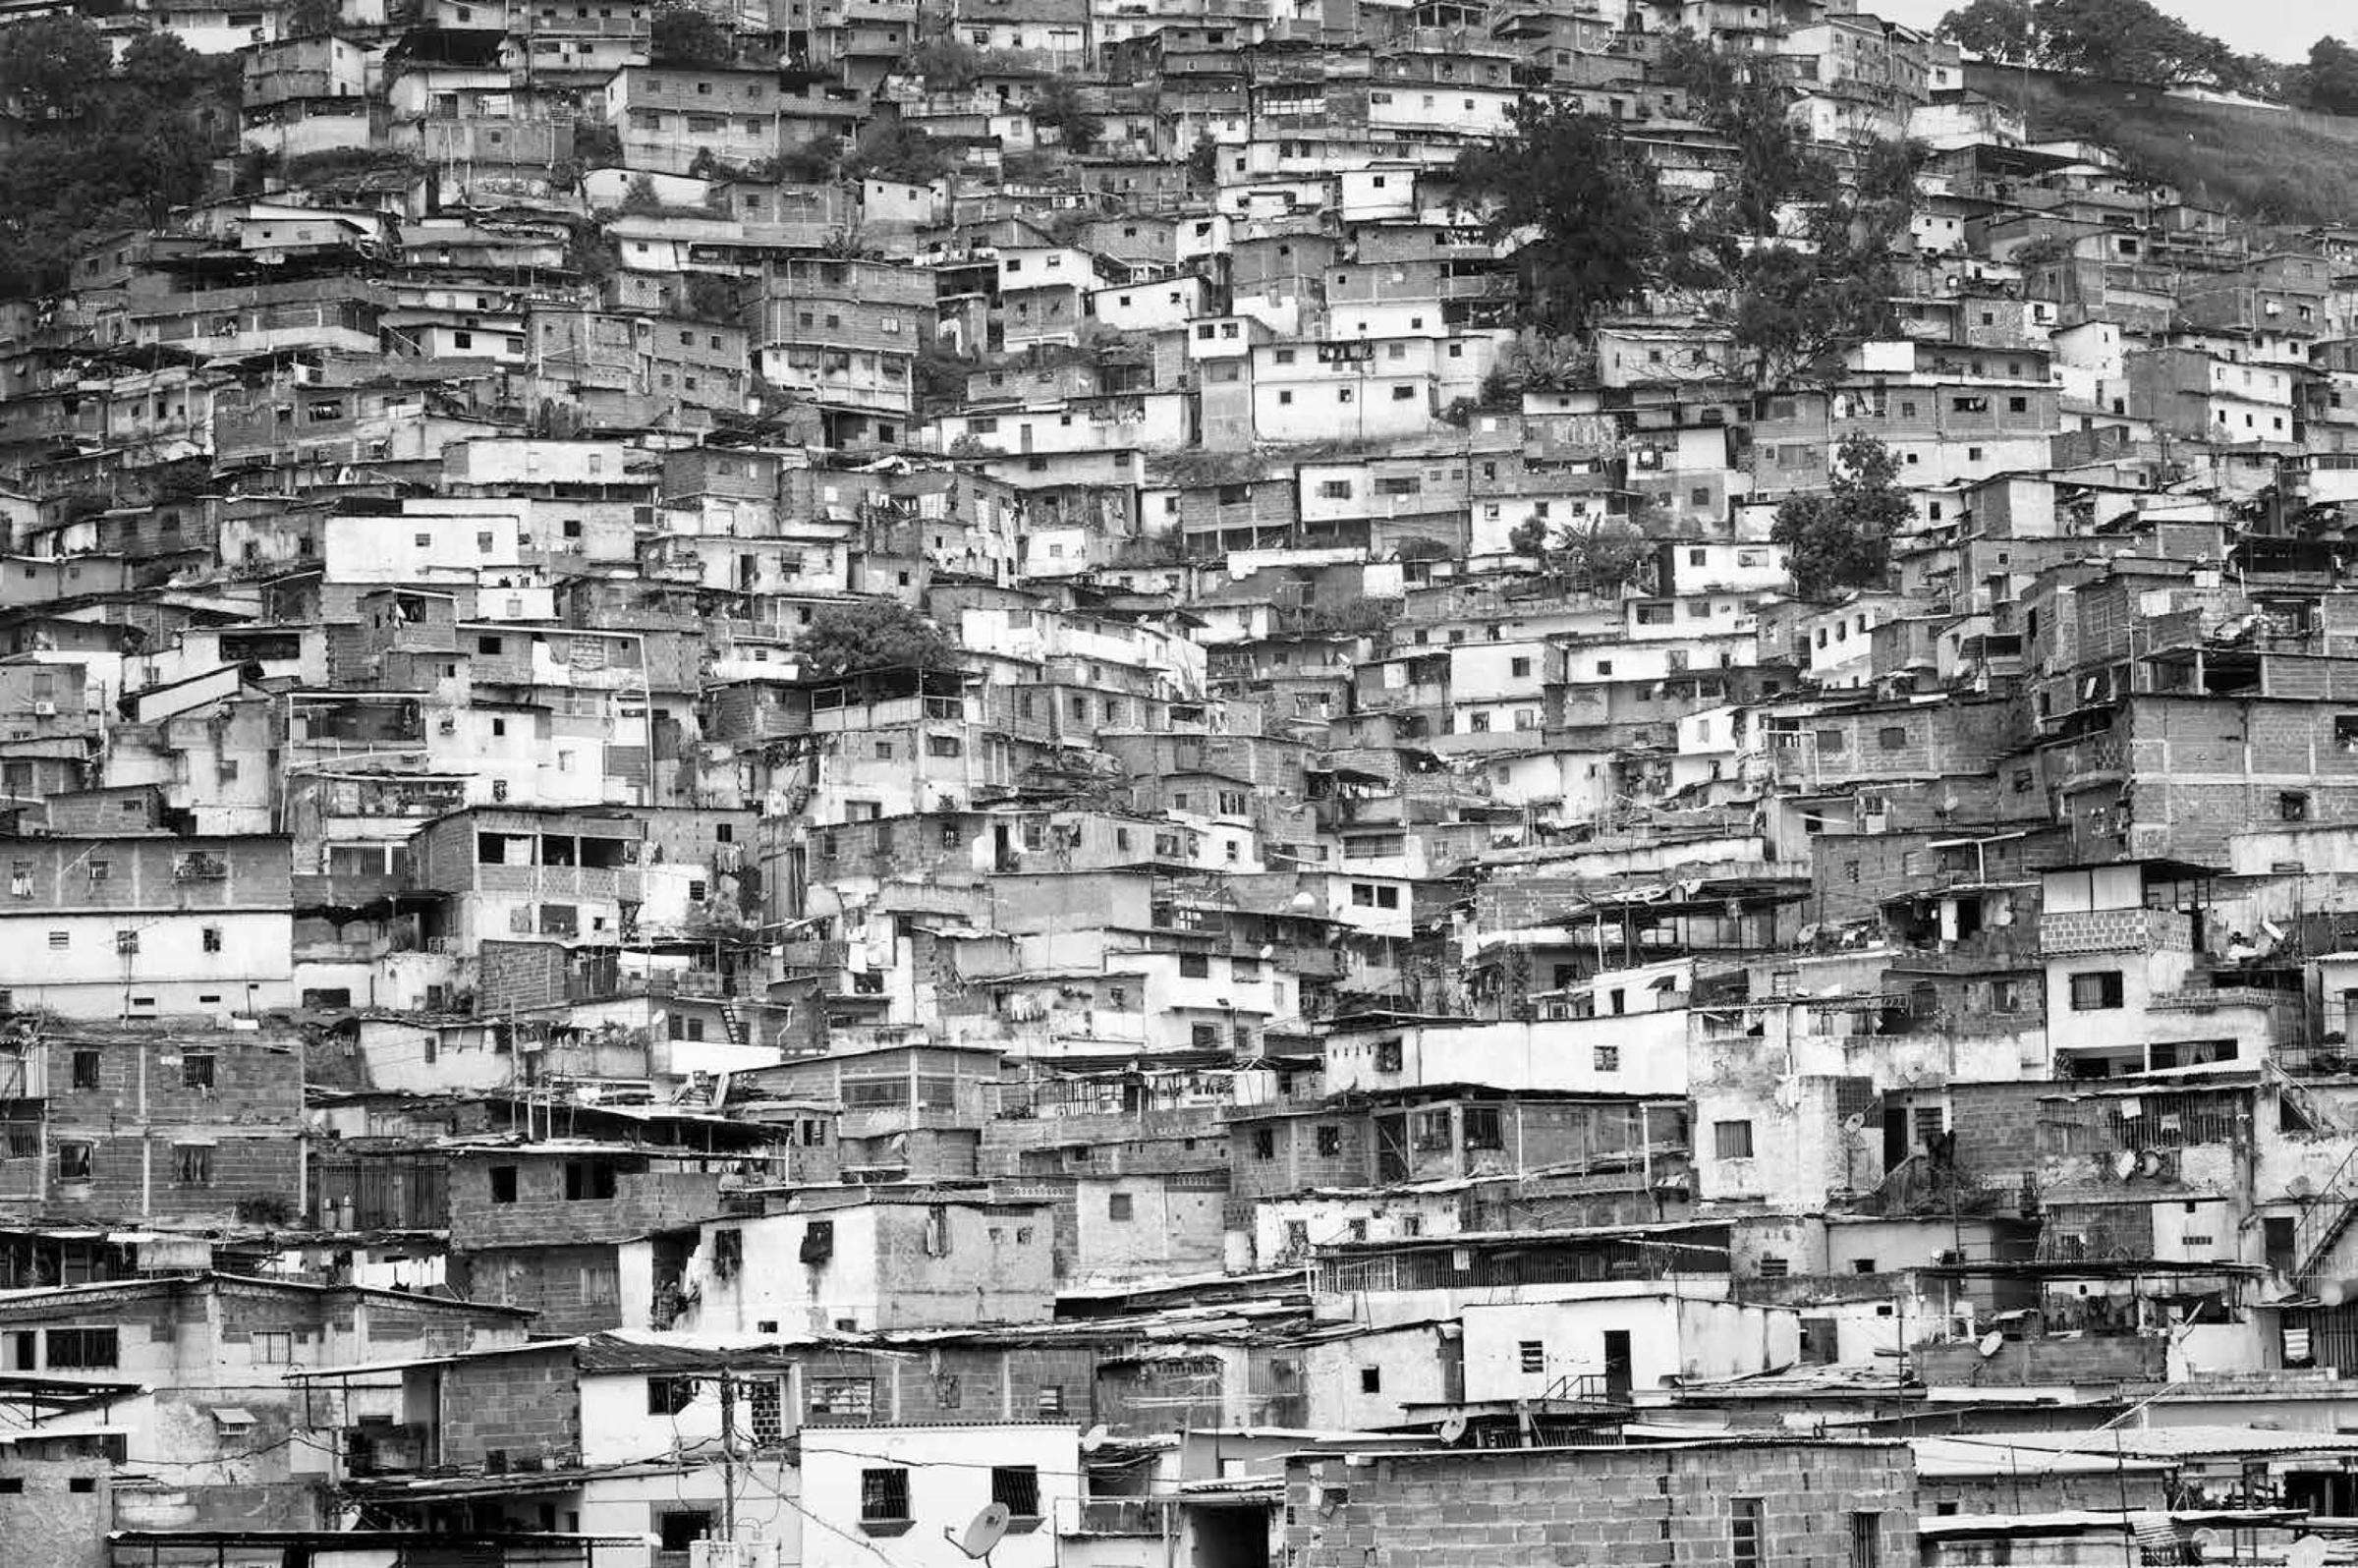 Catia, is one of the many slums in Caracas, Venezuela and a traditional stronghold of criminal gangs, known as colectivos. Supported by the government of President Hugo Chavez, the colectivos became ideologically left wing groups that helped serve the Bolivarian revolution, 2009.